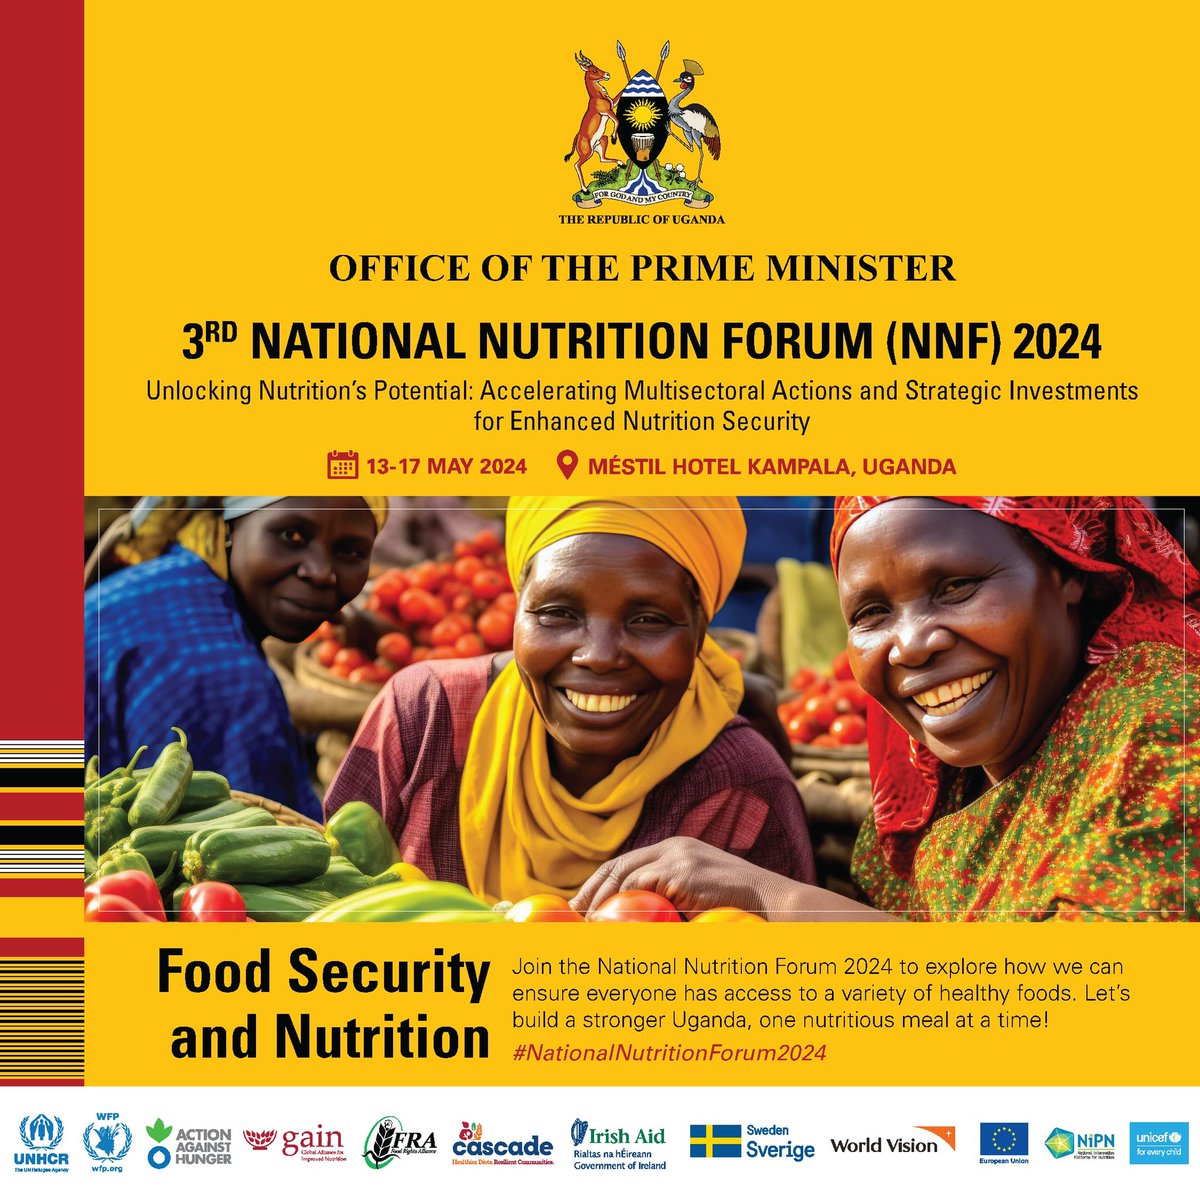 🍱Happening next week is the 3rd #NationalNutritionForum2024 bringing together different stakeholders in the field of food and nutrition to generate practical solutions for the current challenges in this field. The first was held in December 2013 & the second one in March 2018.